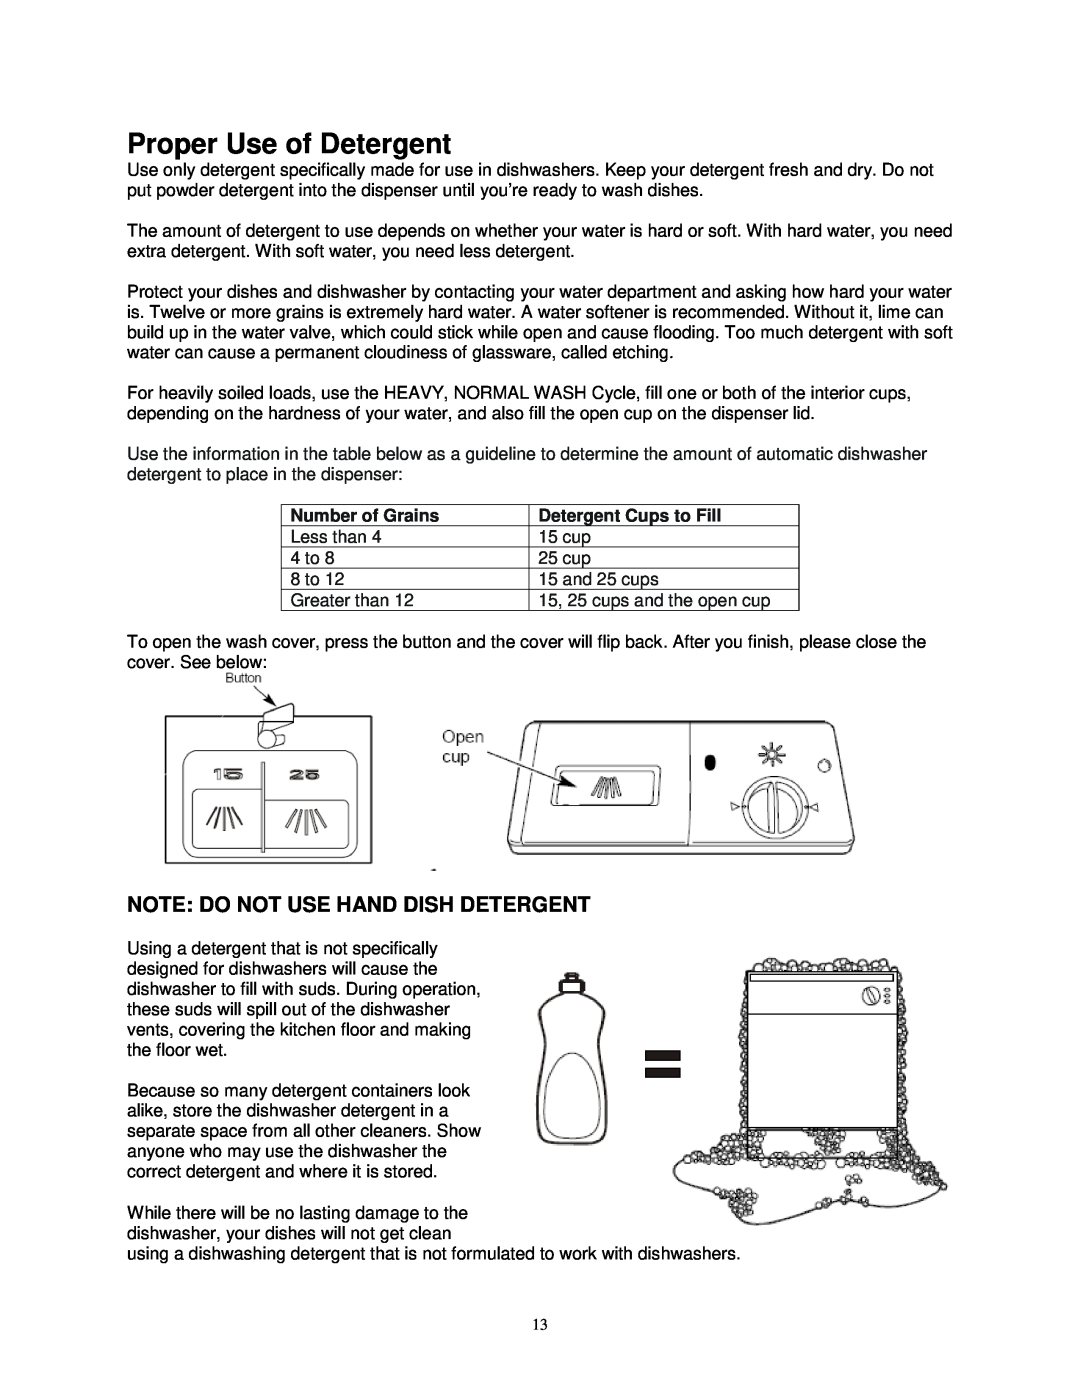 Avanti DW6W Proper Use of Detergent, Note Do Not Use Hand Dish Detergent, Number of Grains, Detergent Cups to Fill, 15 cup 